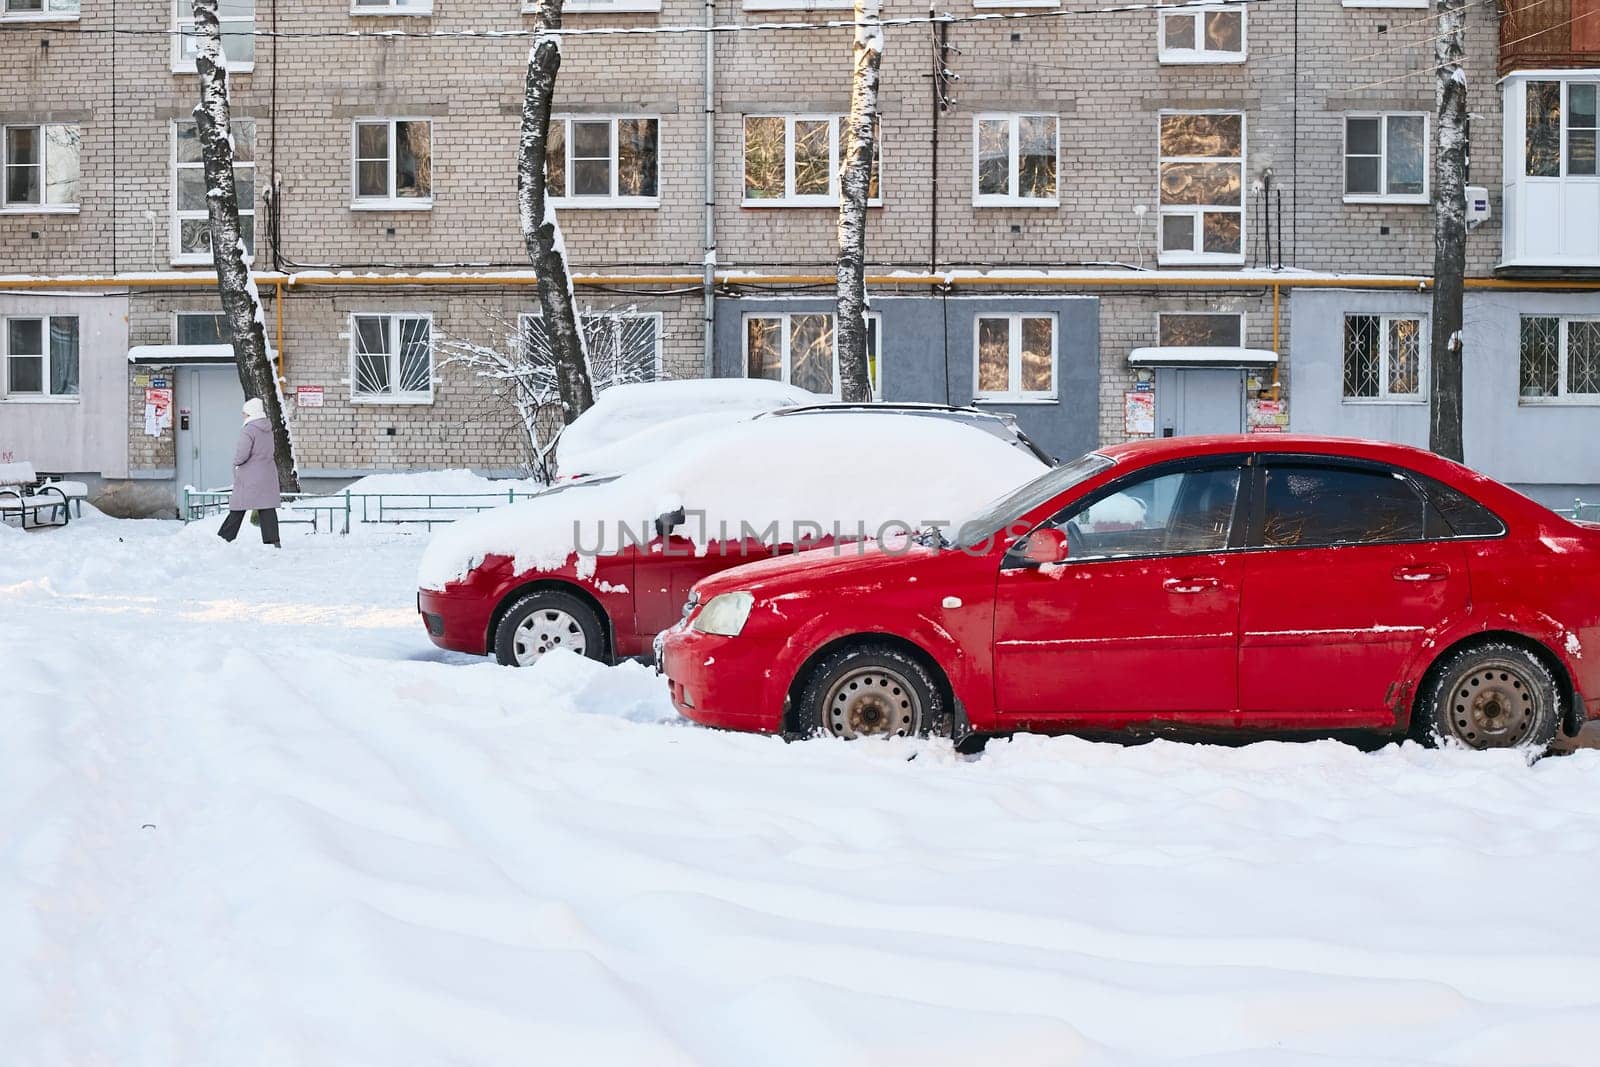 two red cars on ta brick house winter landscape. by electrovenik